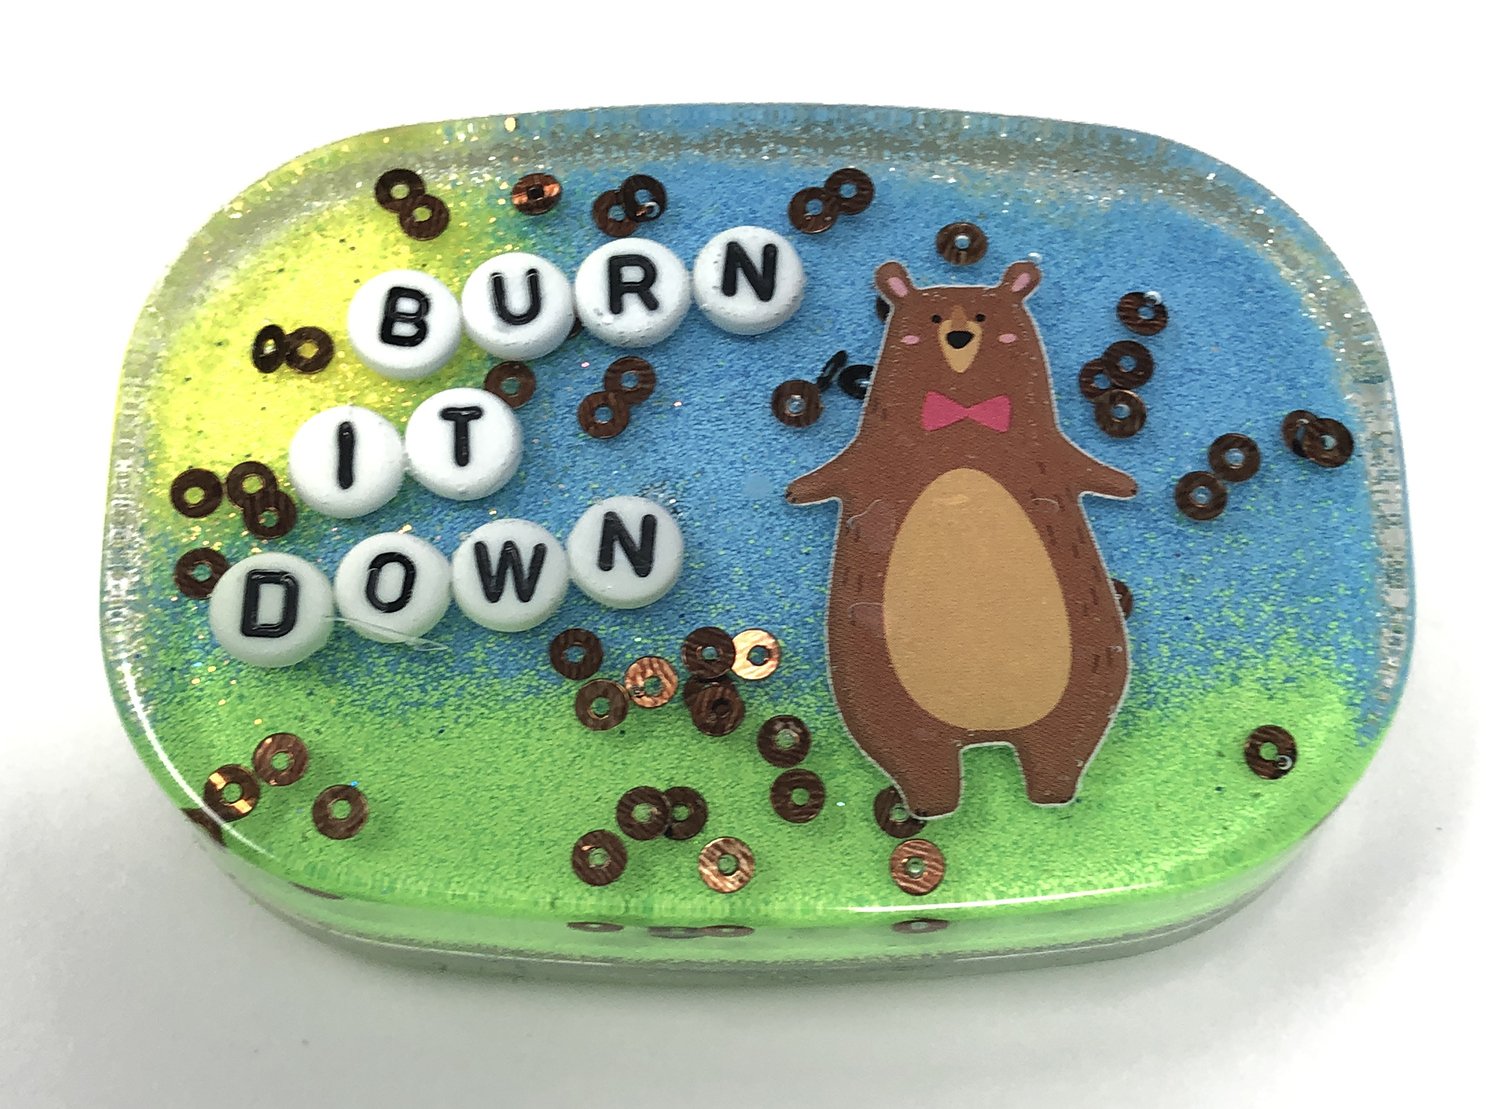 Burn It Down - Small Shower Art - READY TO SHIP